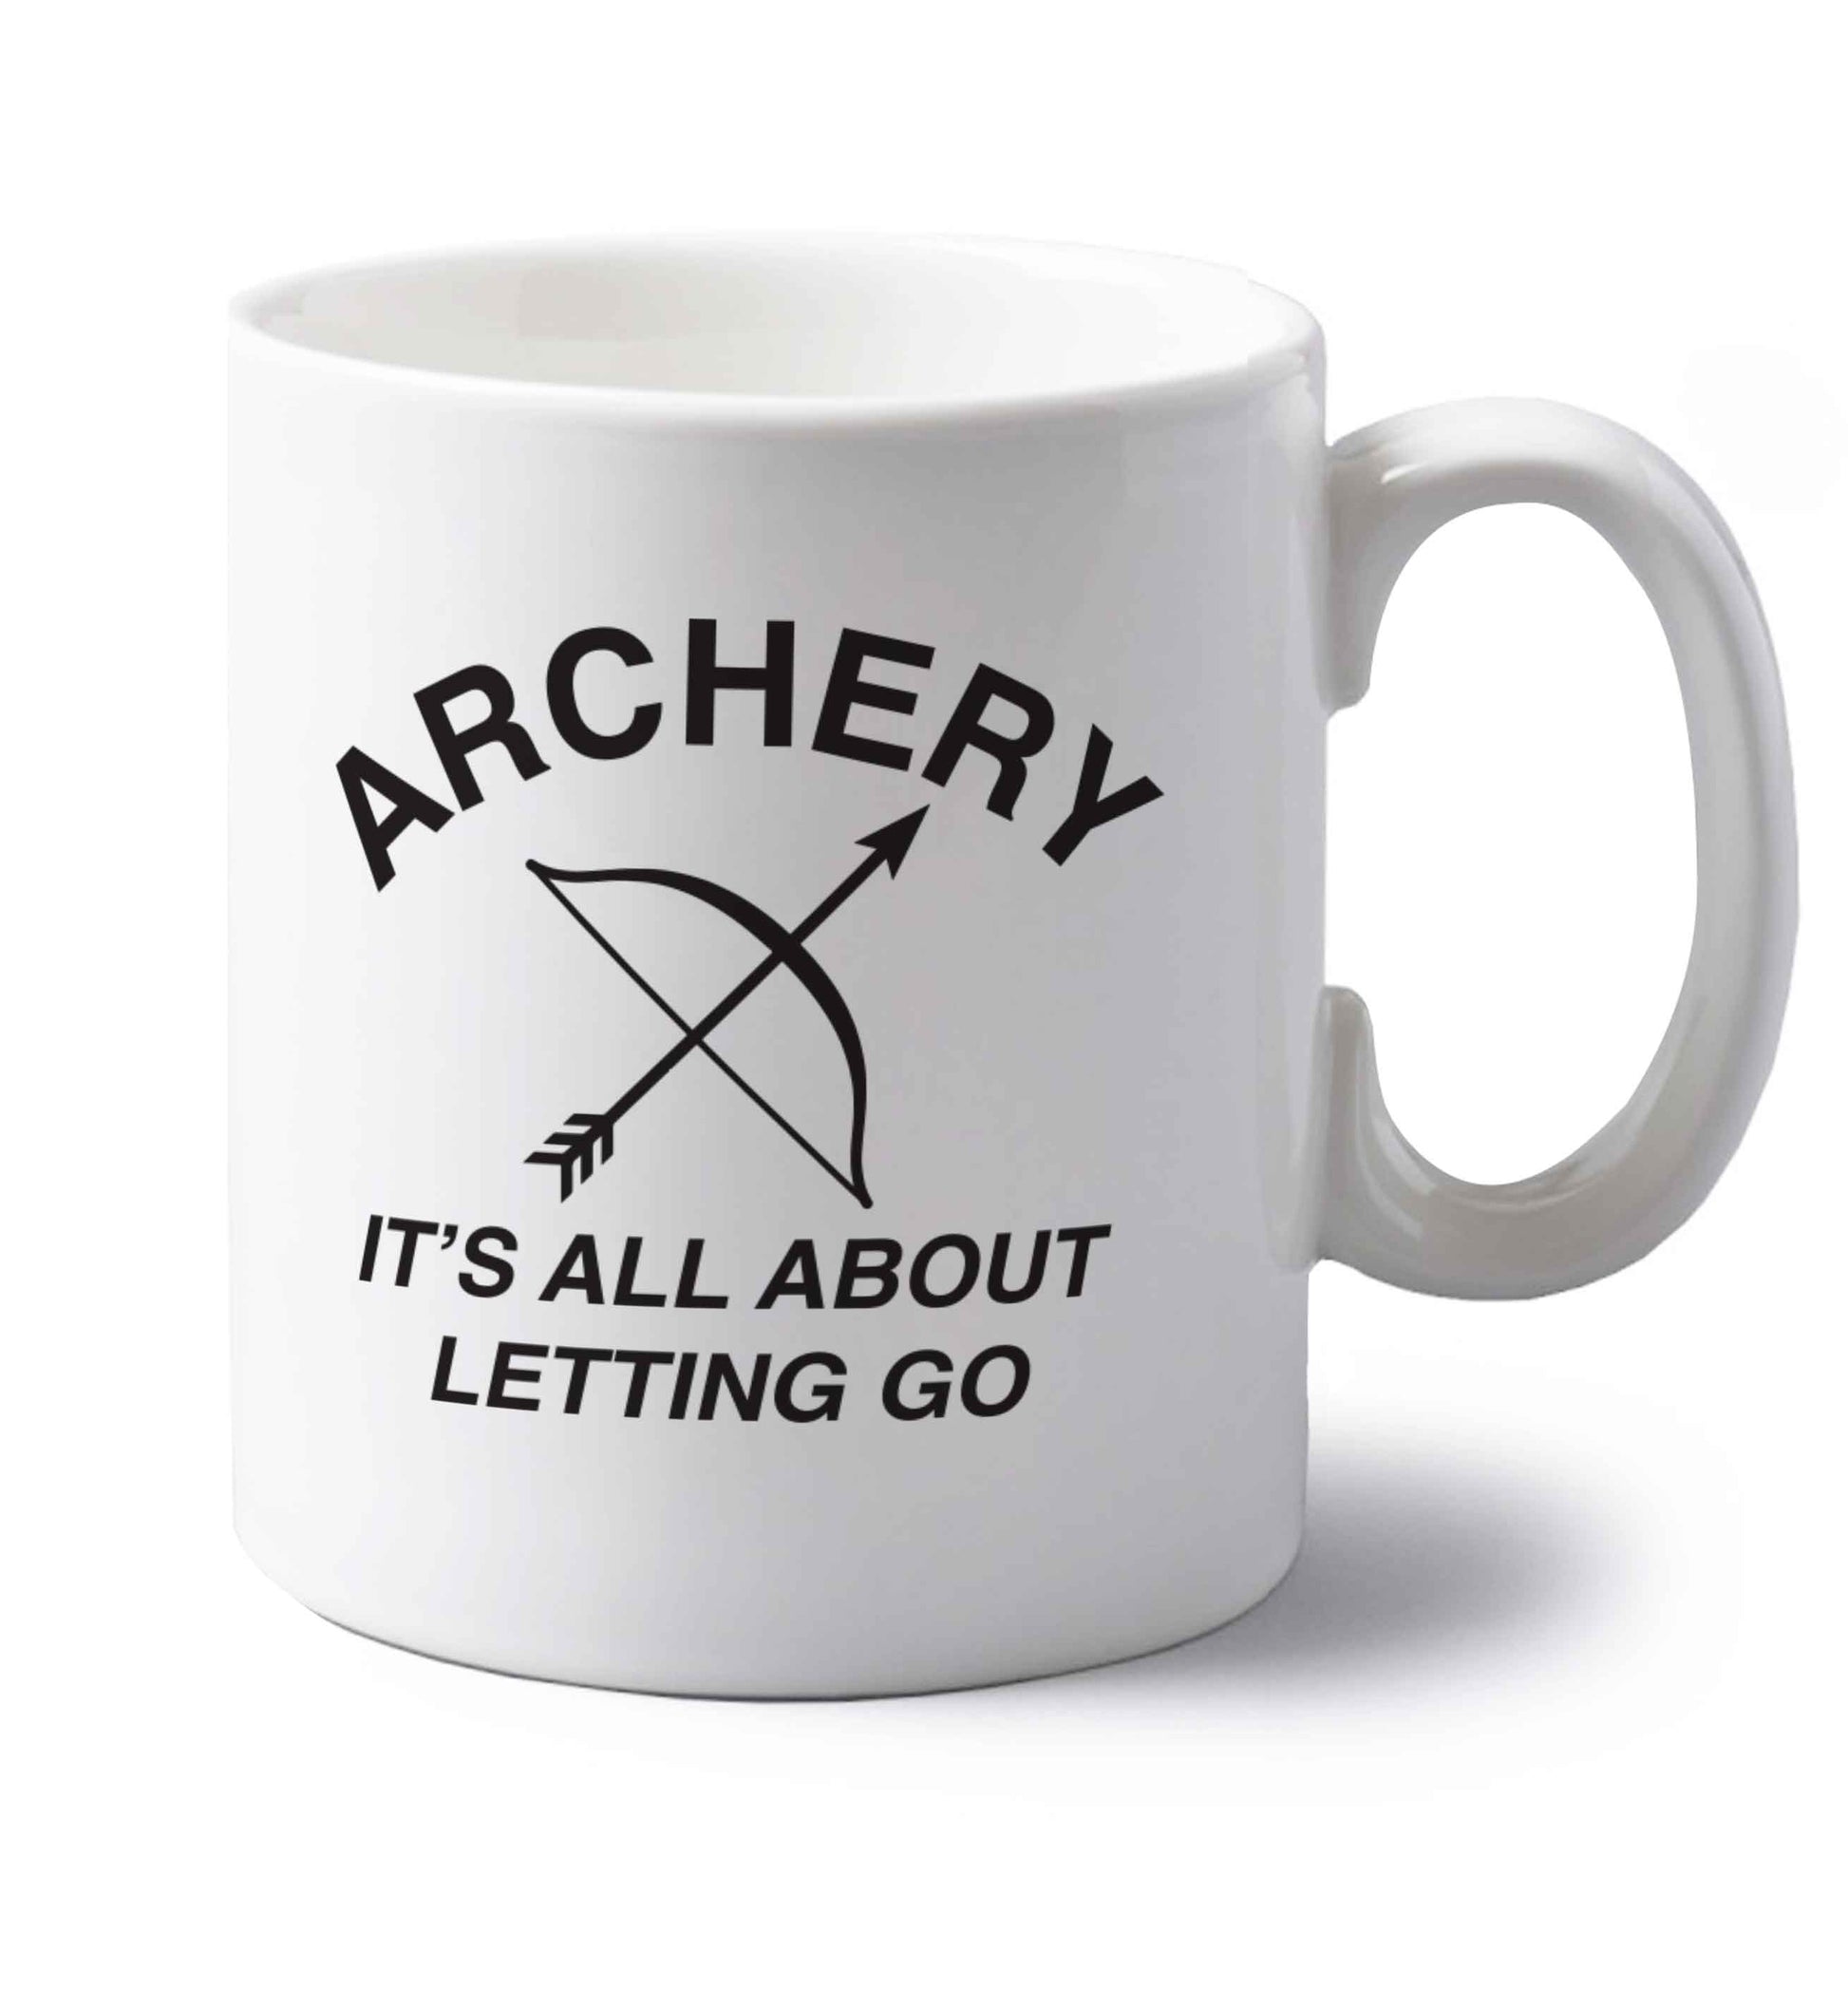 Archery it's all about letting go left handed white ceramic mug 